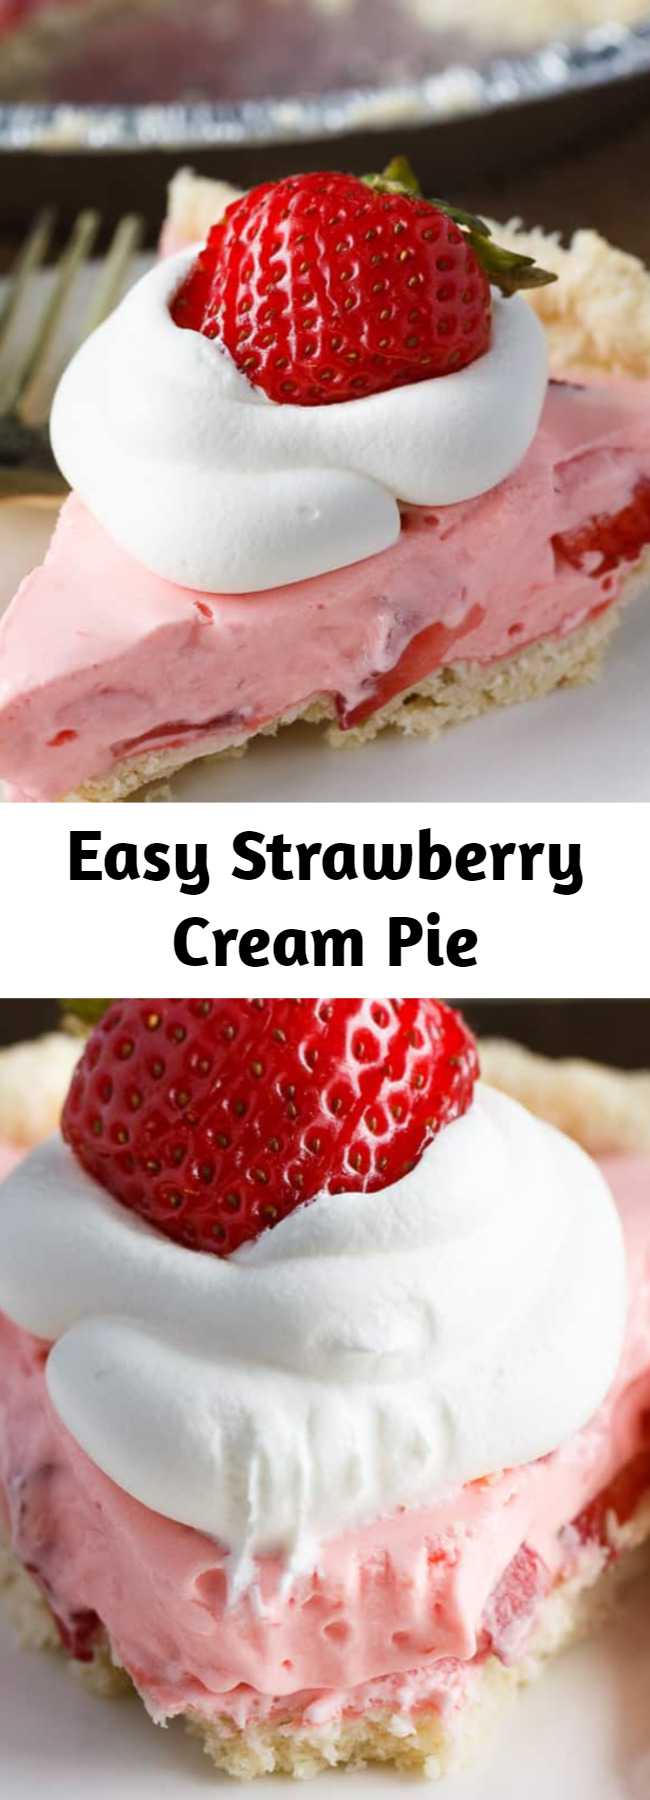 Easy Strawberry Cream Pie - It’s light, creamy, sweet and is like pure heaven in your mouth. Strawberry lovers will go nuts over this easy pie recipe. Seriously, it’s soooo good. Tastes like a dream! This easy summer pie is creamy, sweet and refreshing. #dessert #summer